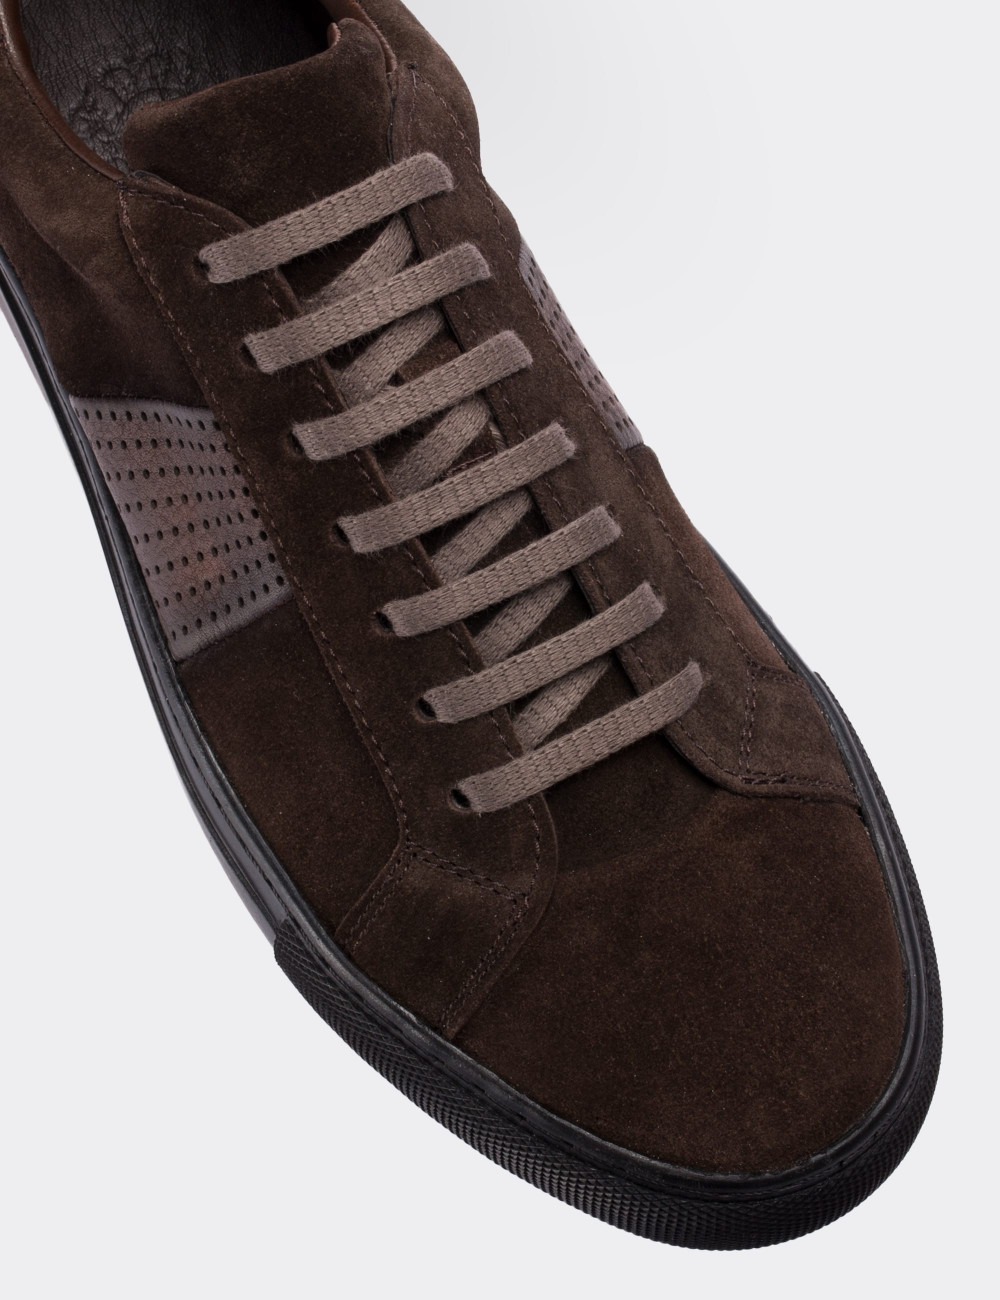 Brown Suede Leather Sneakers - 01740MKHVC01